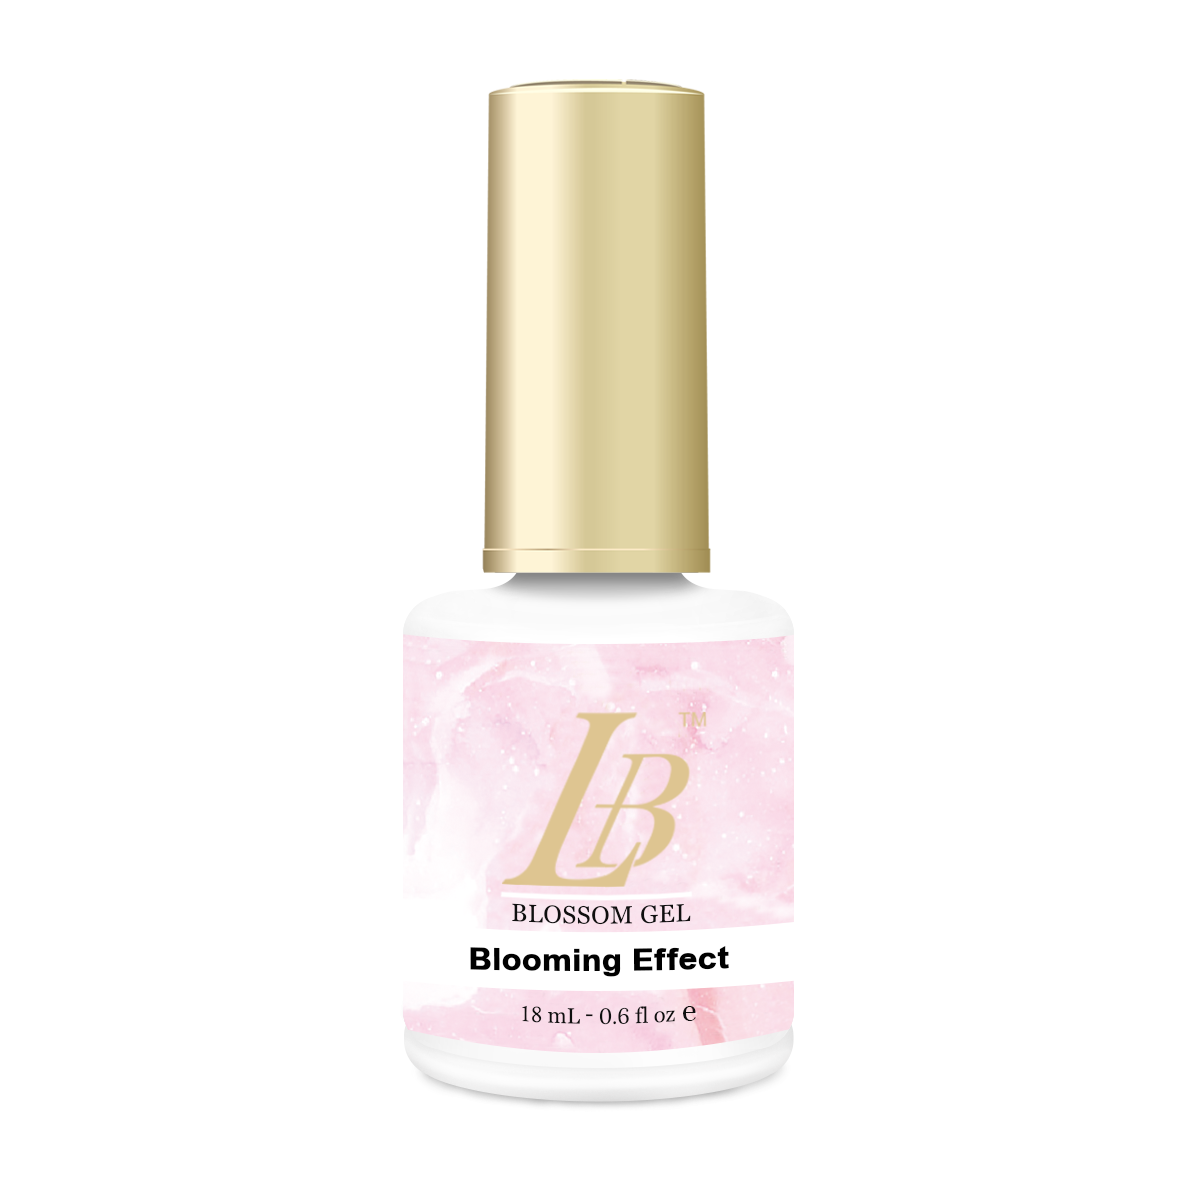 Blossom Gel - Blooming Effect